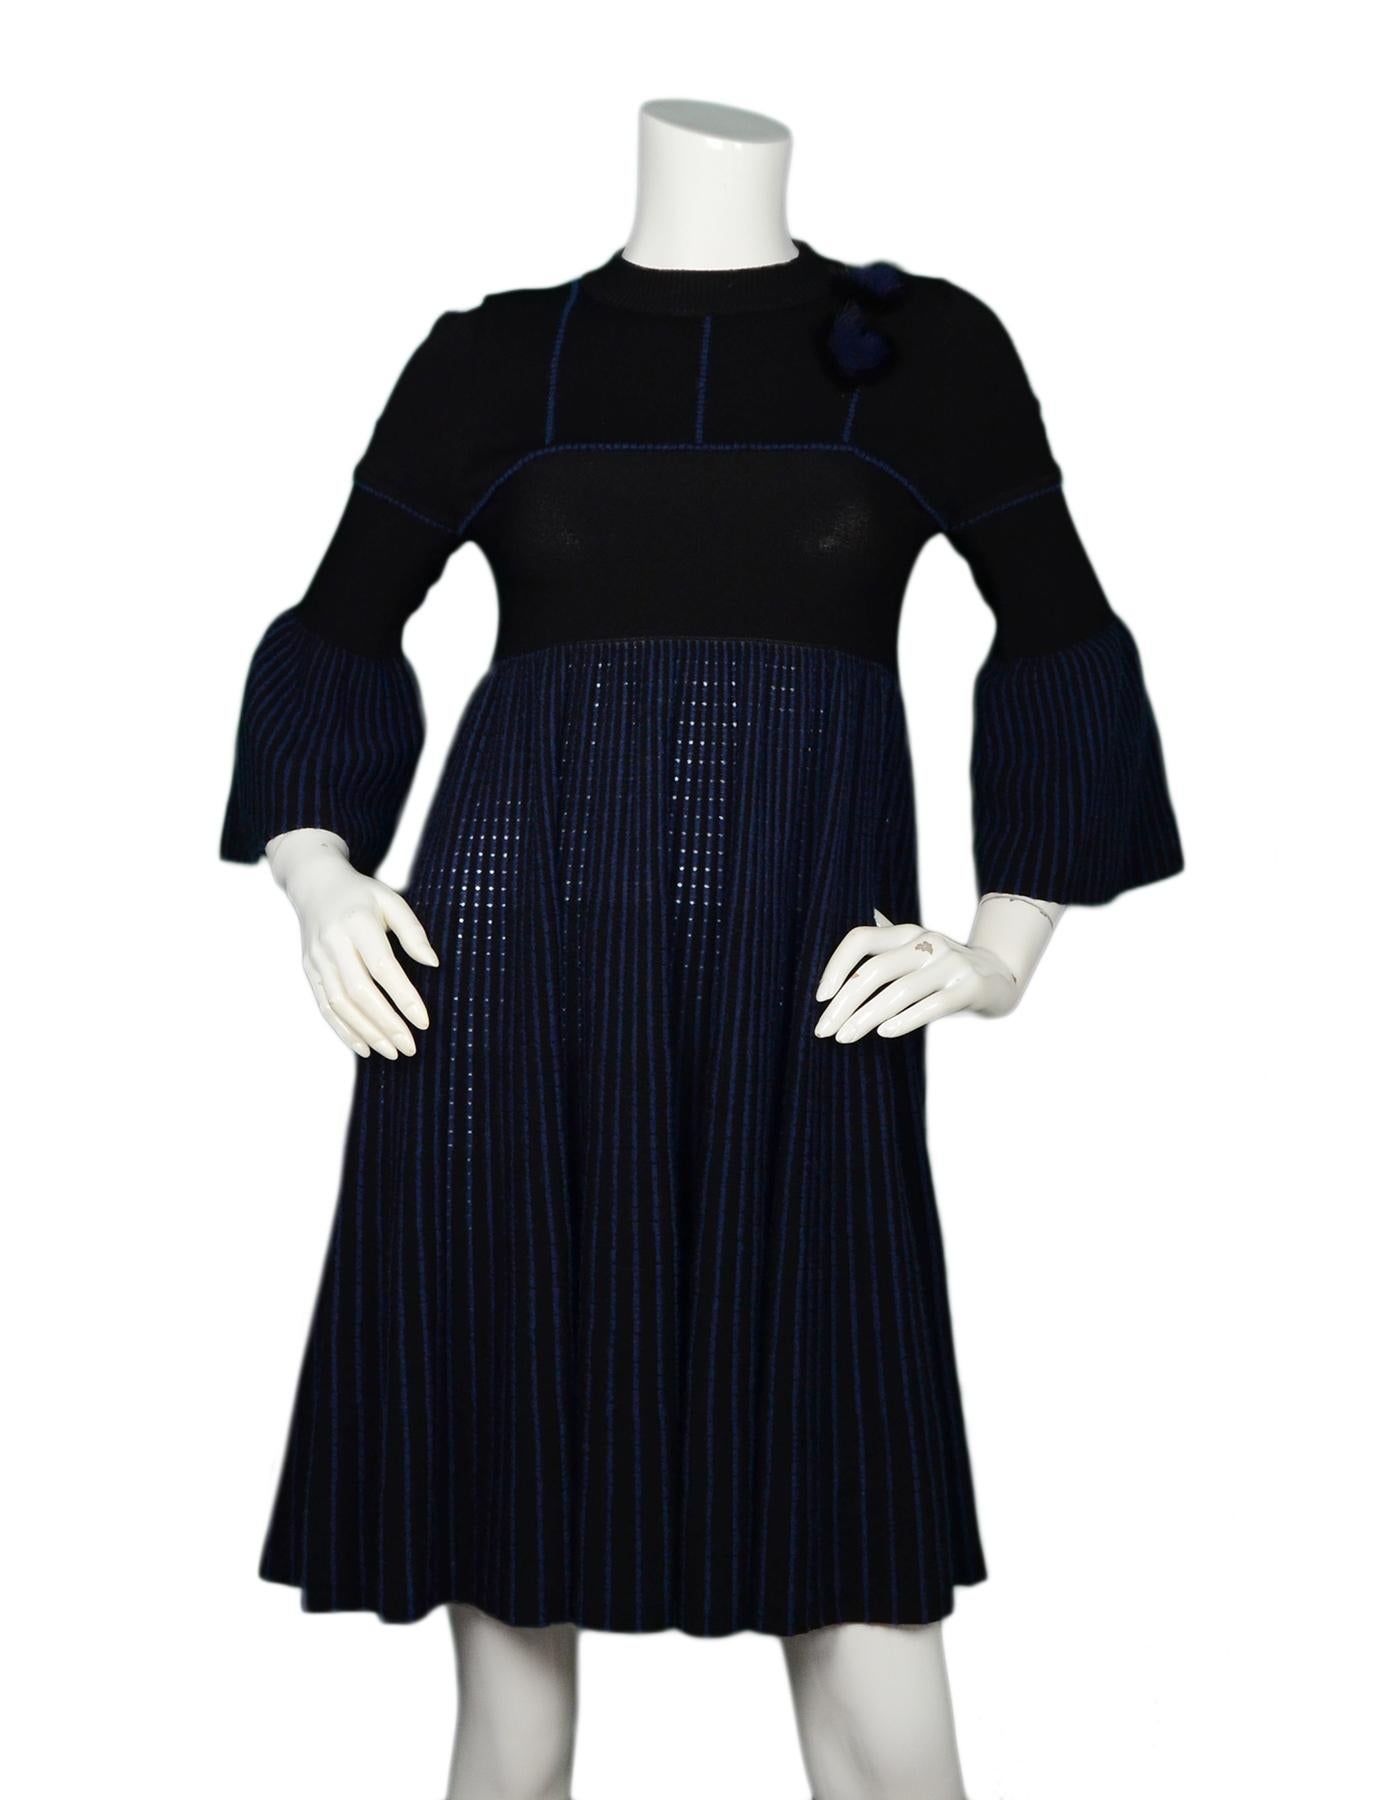 Fendi Navy/Black Knit Dress W/ Mink Fur Heart Detail Sz IT38/US2

Made In: Italy
Color: Navy/black
Materials: 75% rayon, 15% polyester, 5% mohair, 4% nylon, 2% wool
Opening/Closure: Pull over with two back neck buttons
Overall Condition: Excellent